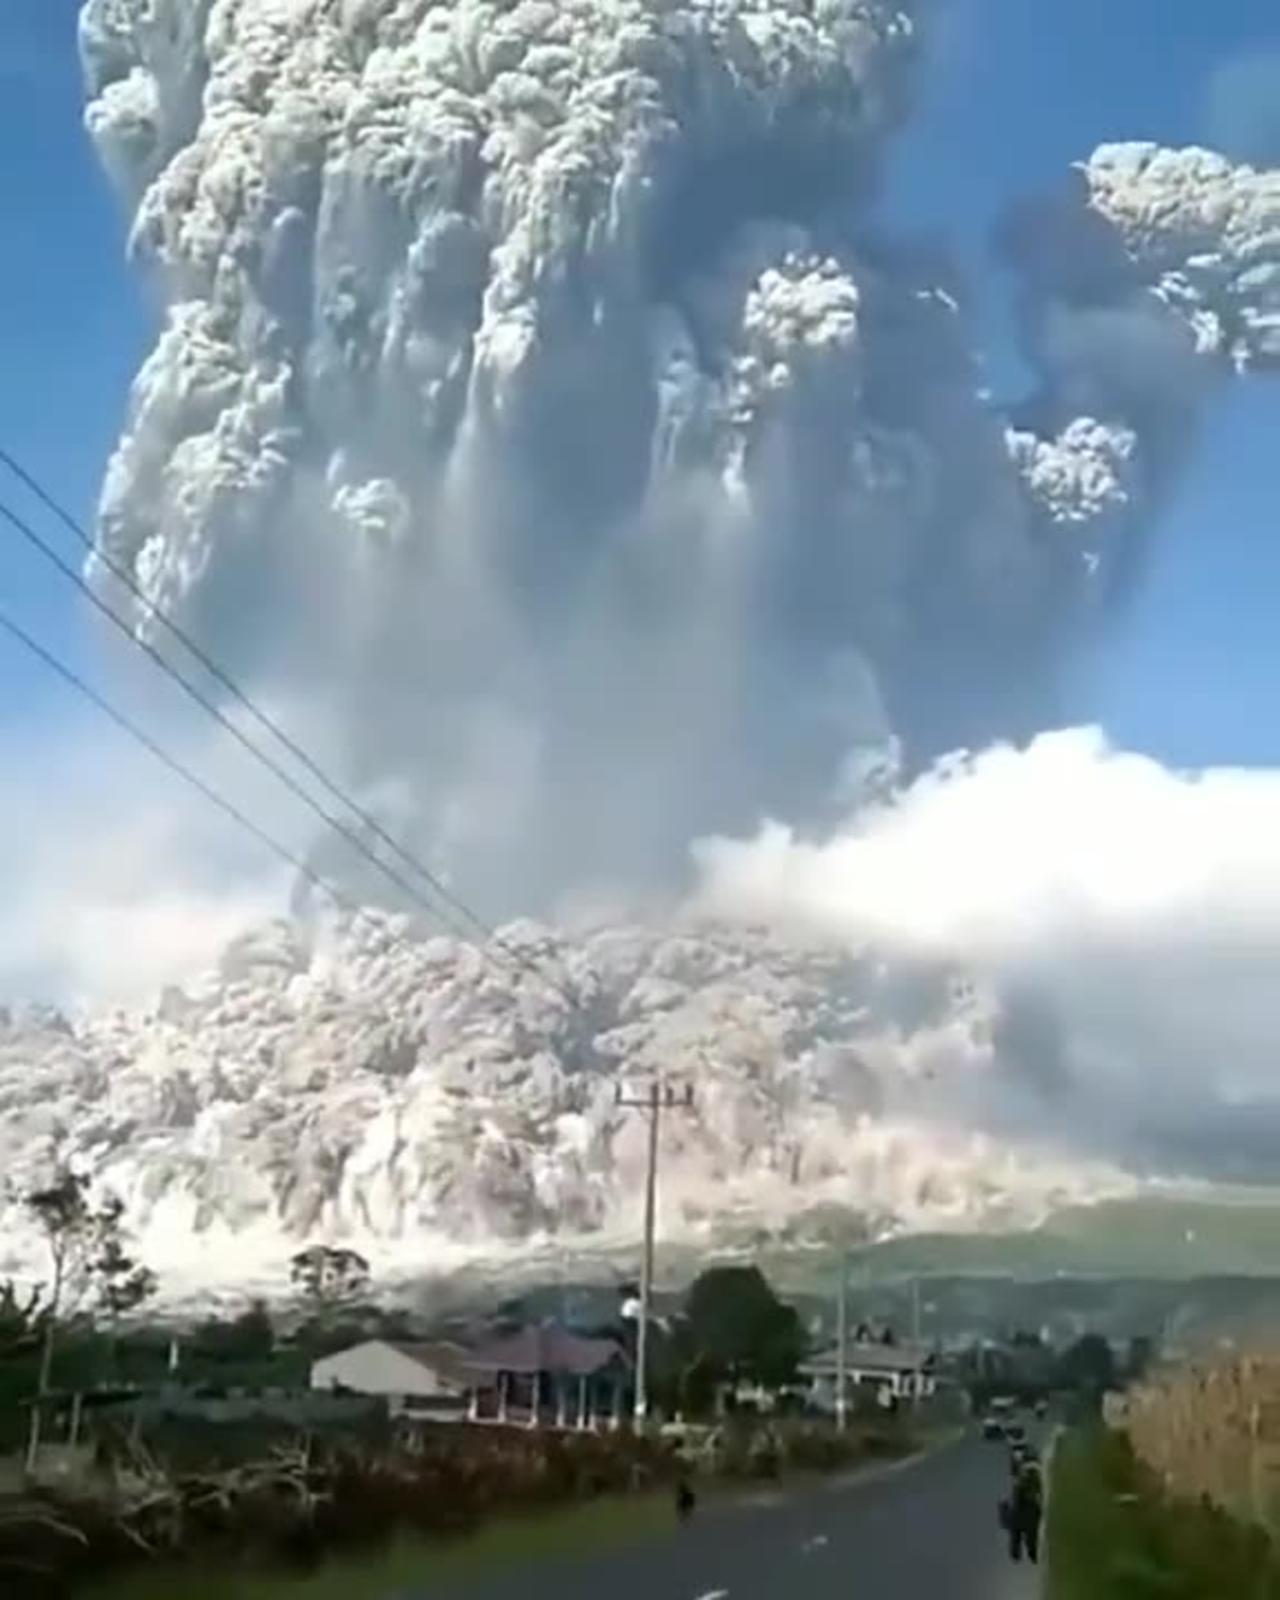 Indonesia’s Mount Merapi has erupted with searing gas clouds and lava.